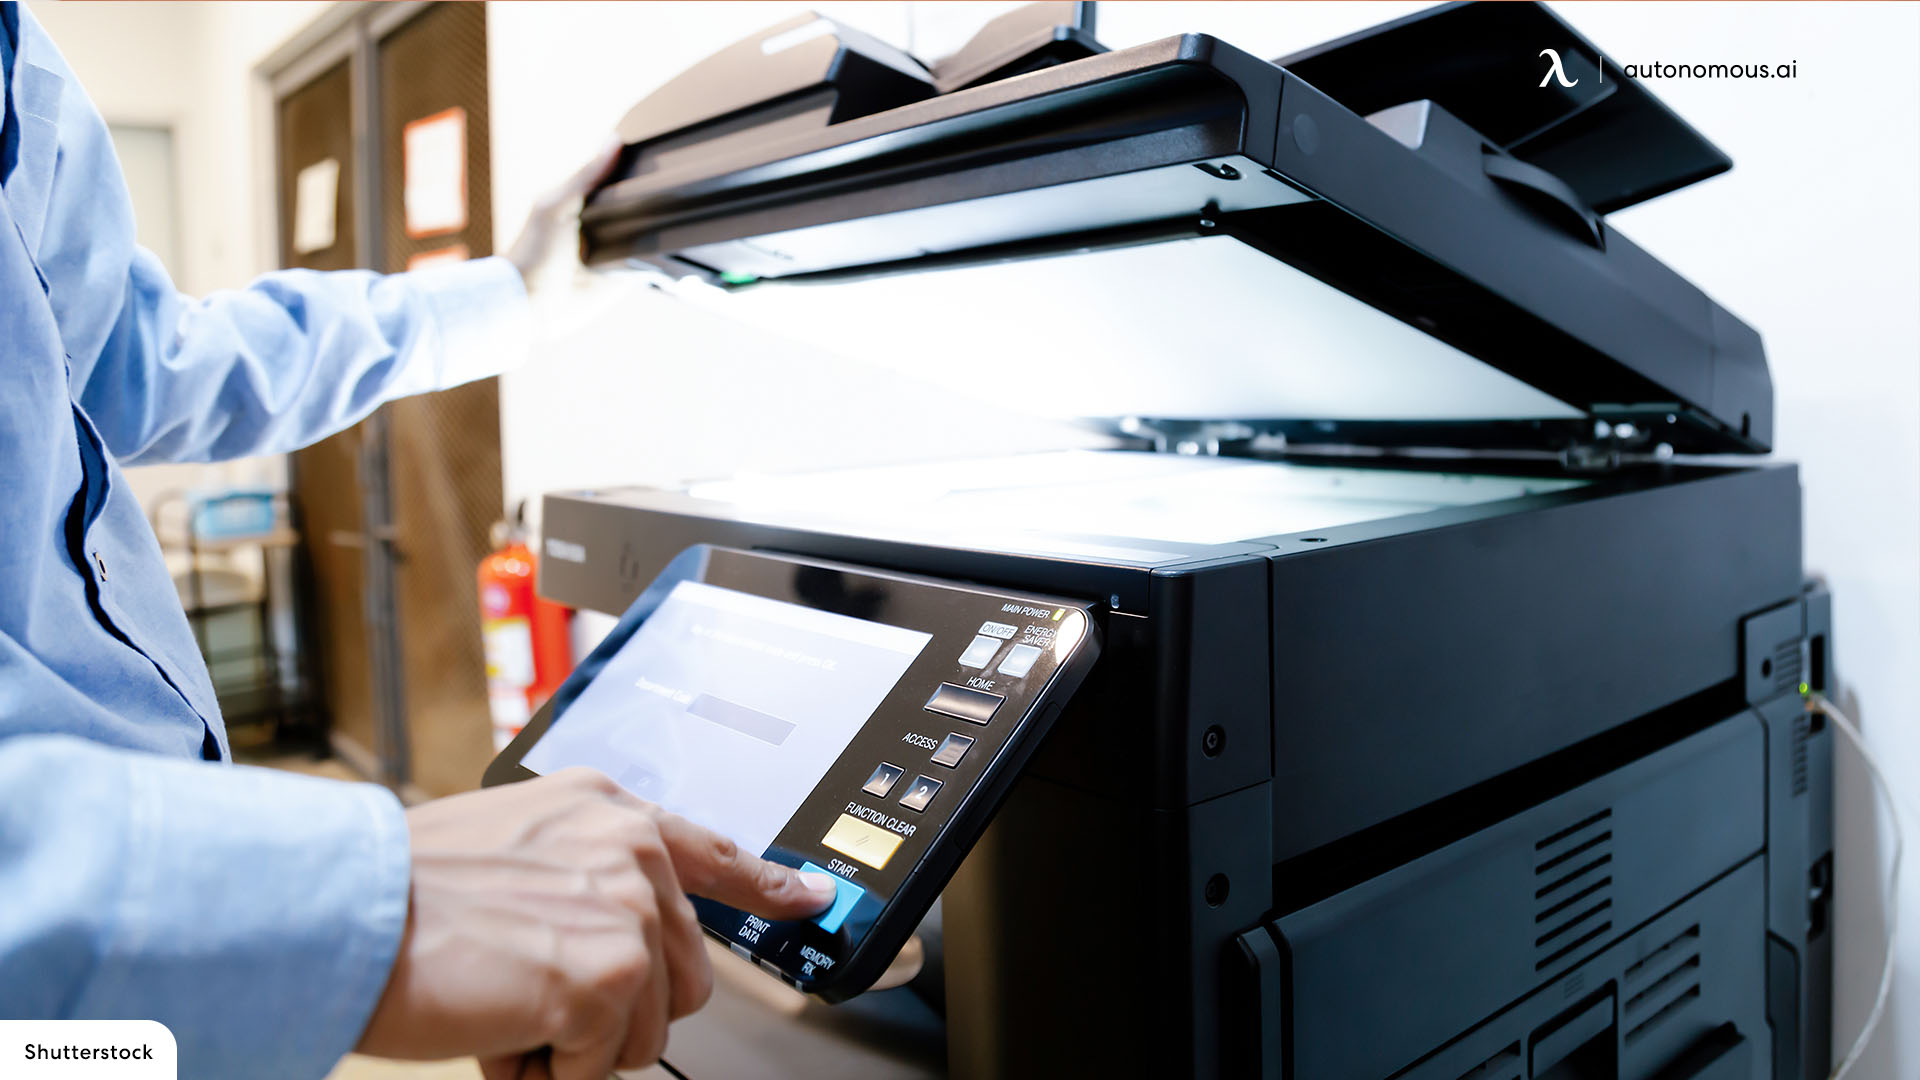 Printing, Scanning, and Copying